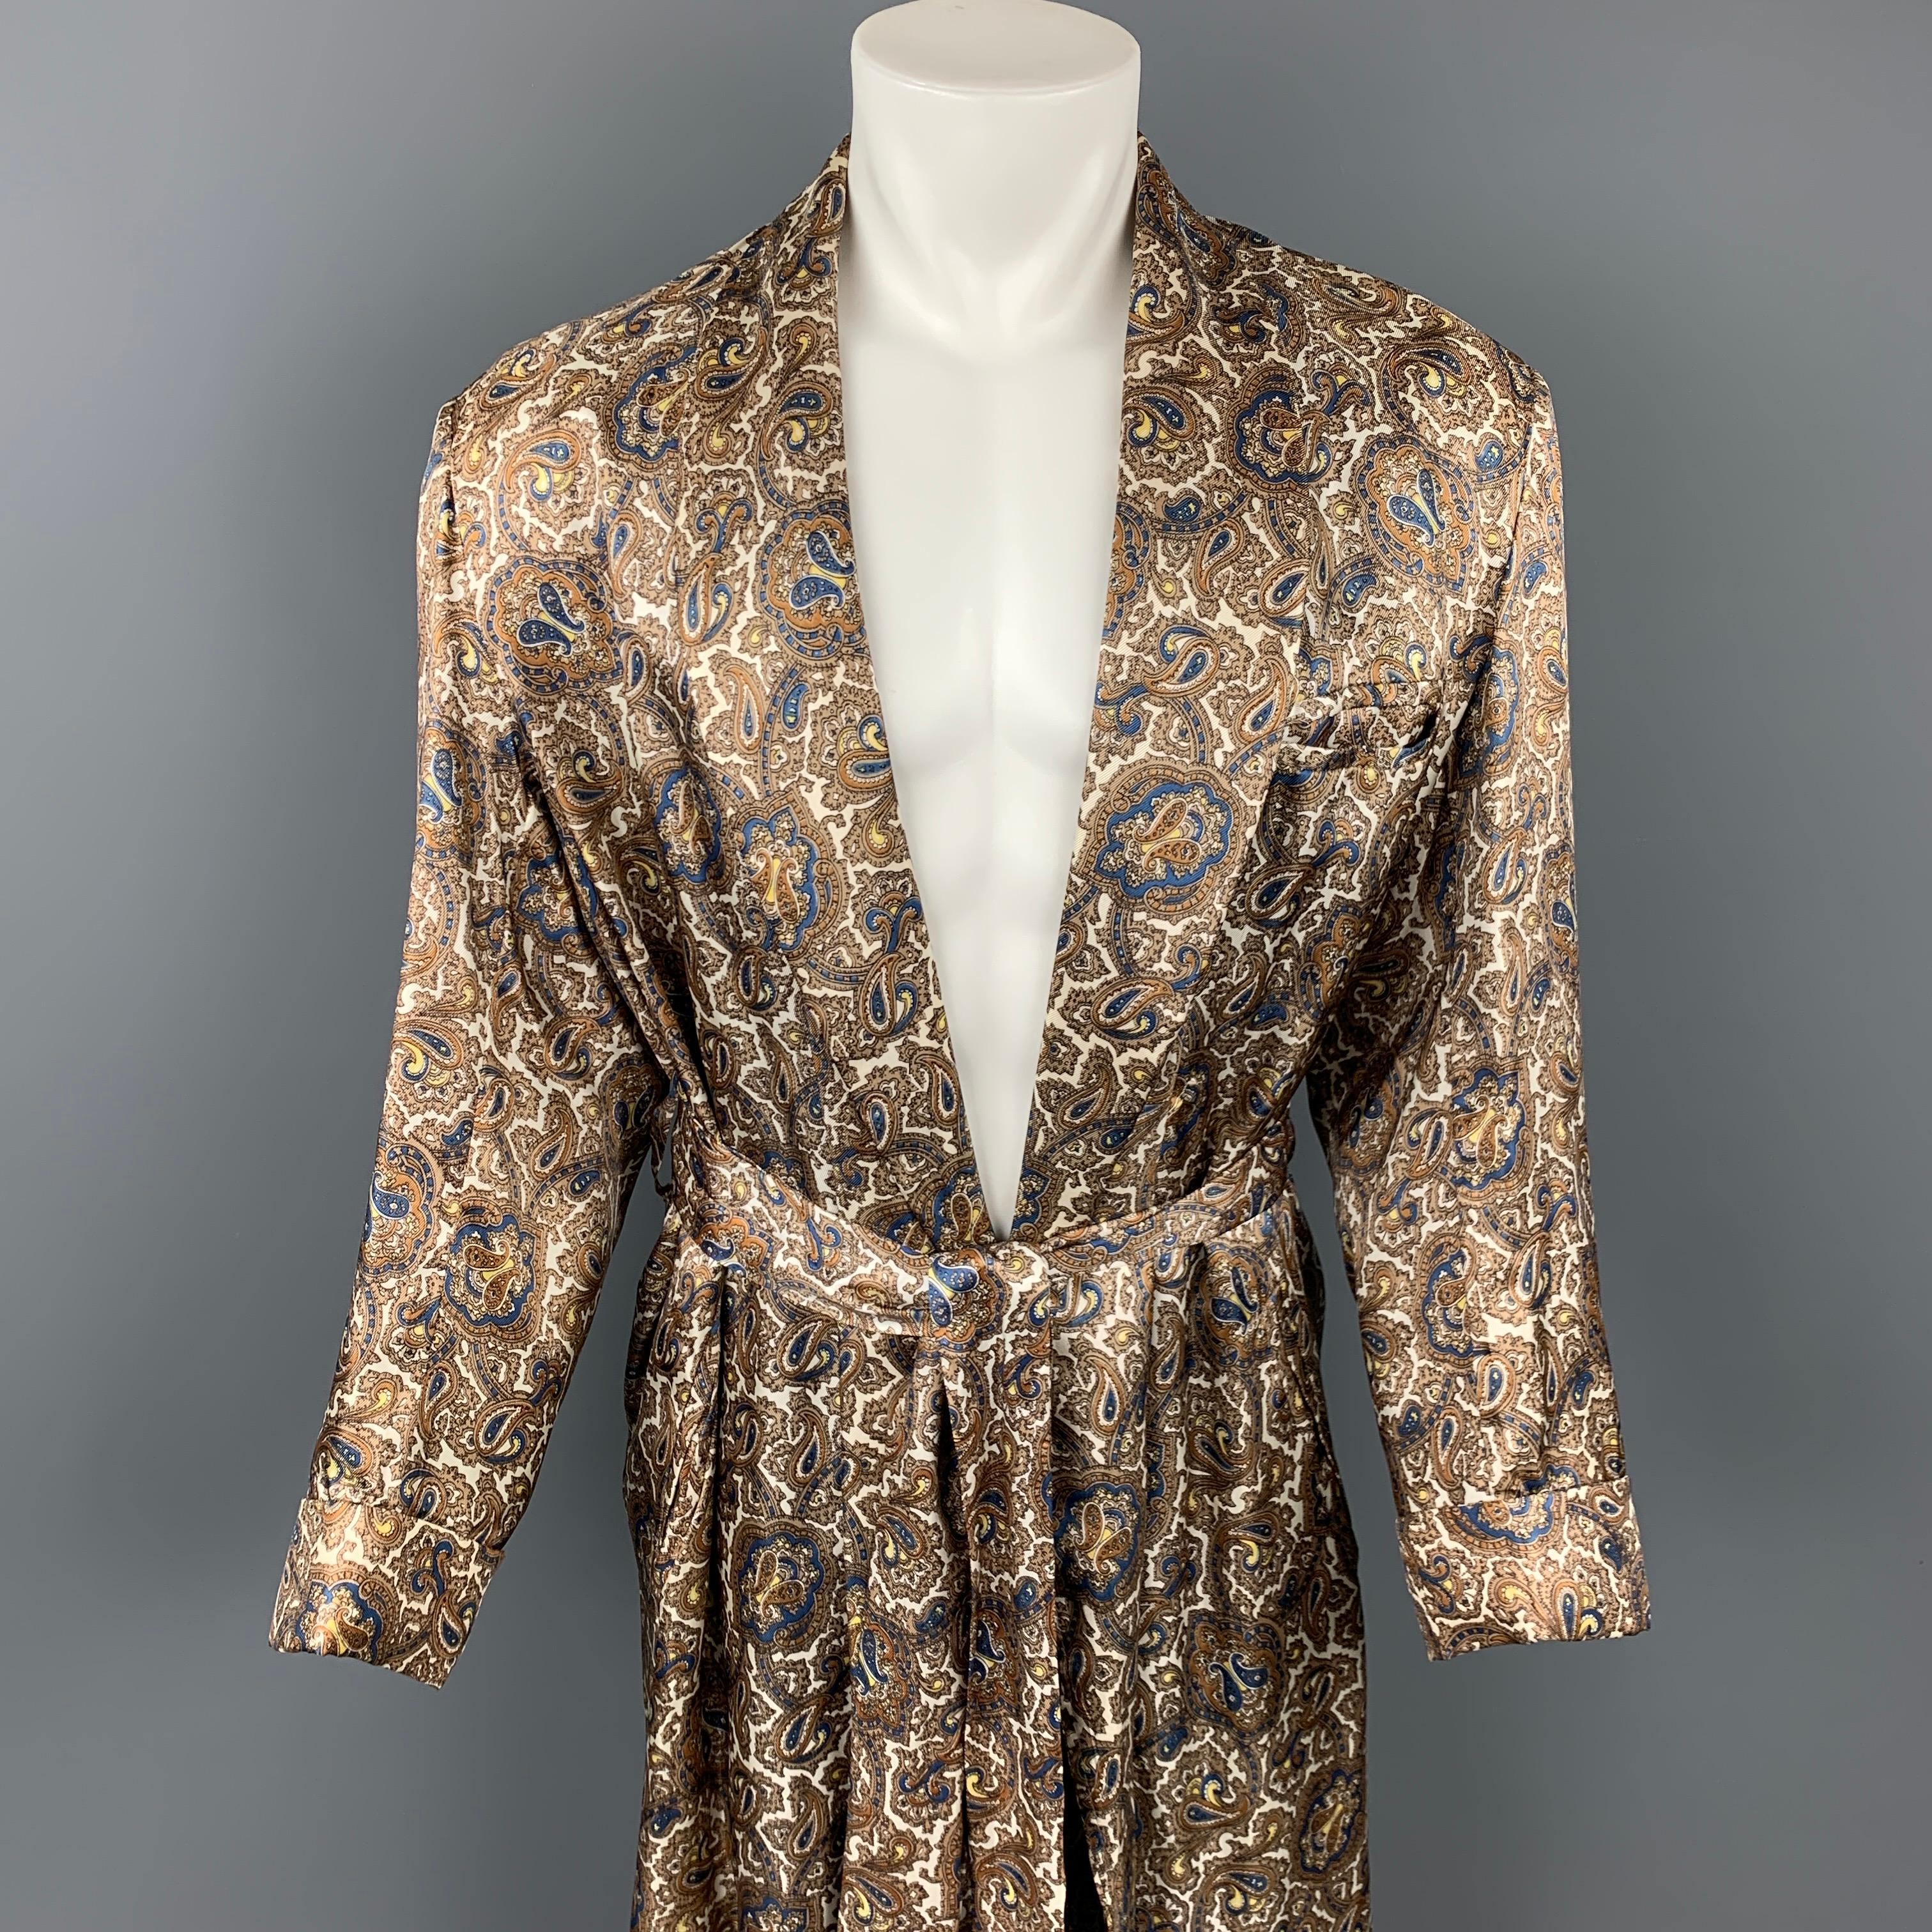 Vintage JORDAN MARSH robe comes in a taupe & white paisley silk with a teal liner featuring a shawl collar, open front, and belted closure.

Good Pre-Owned Condition.
Marked: No size marked

Measurements:

Shoulder: 18 in.
Chest: 40 in.
Sleeve: 23